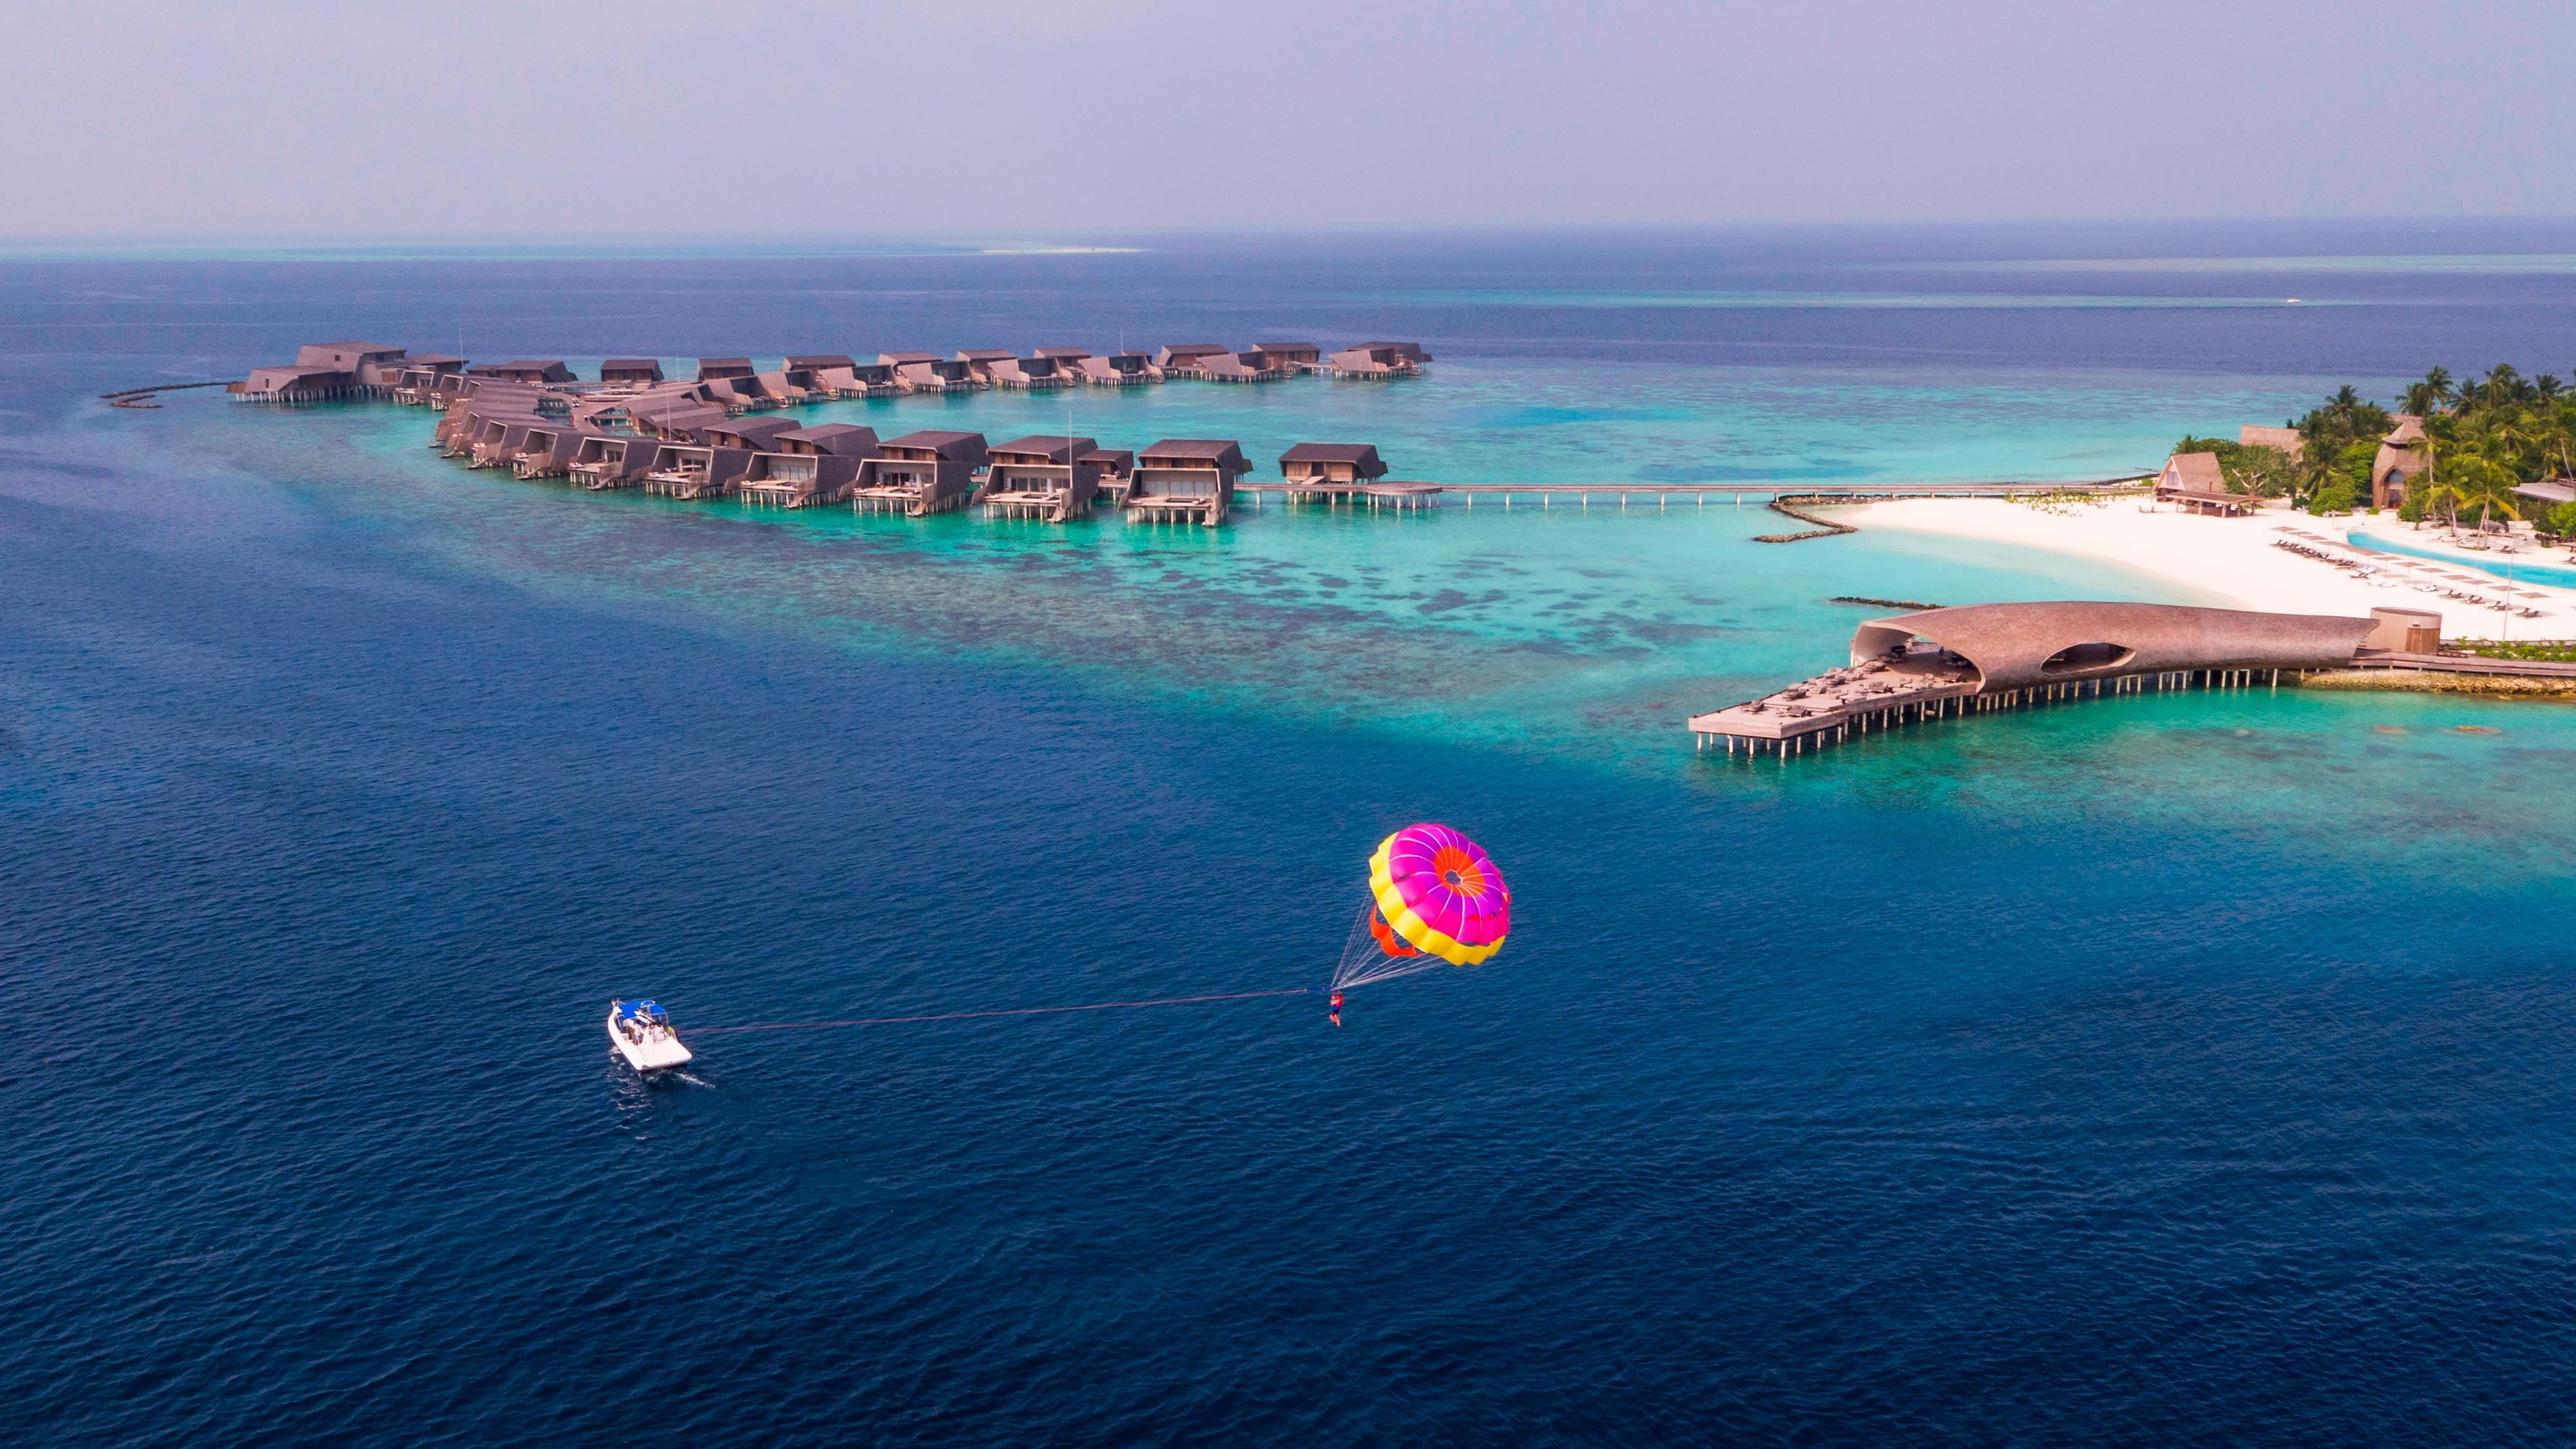 Parasailing by the villas